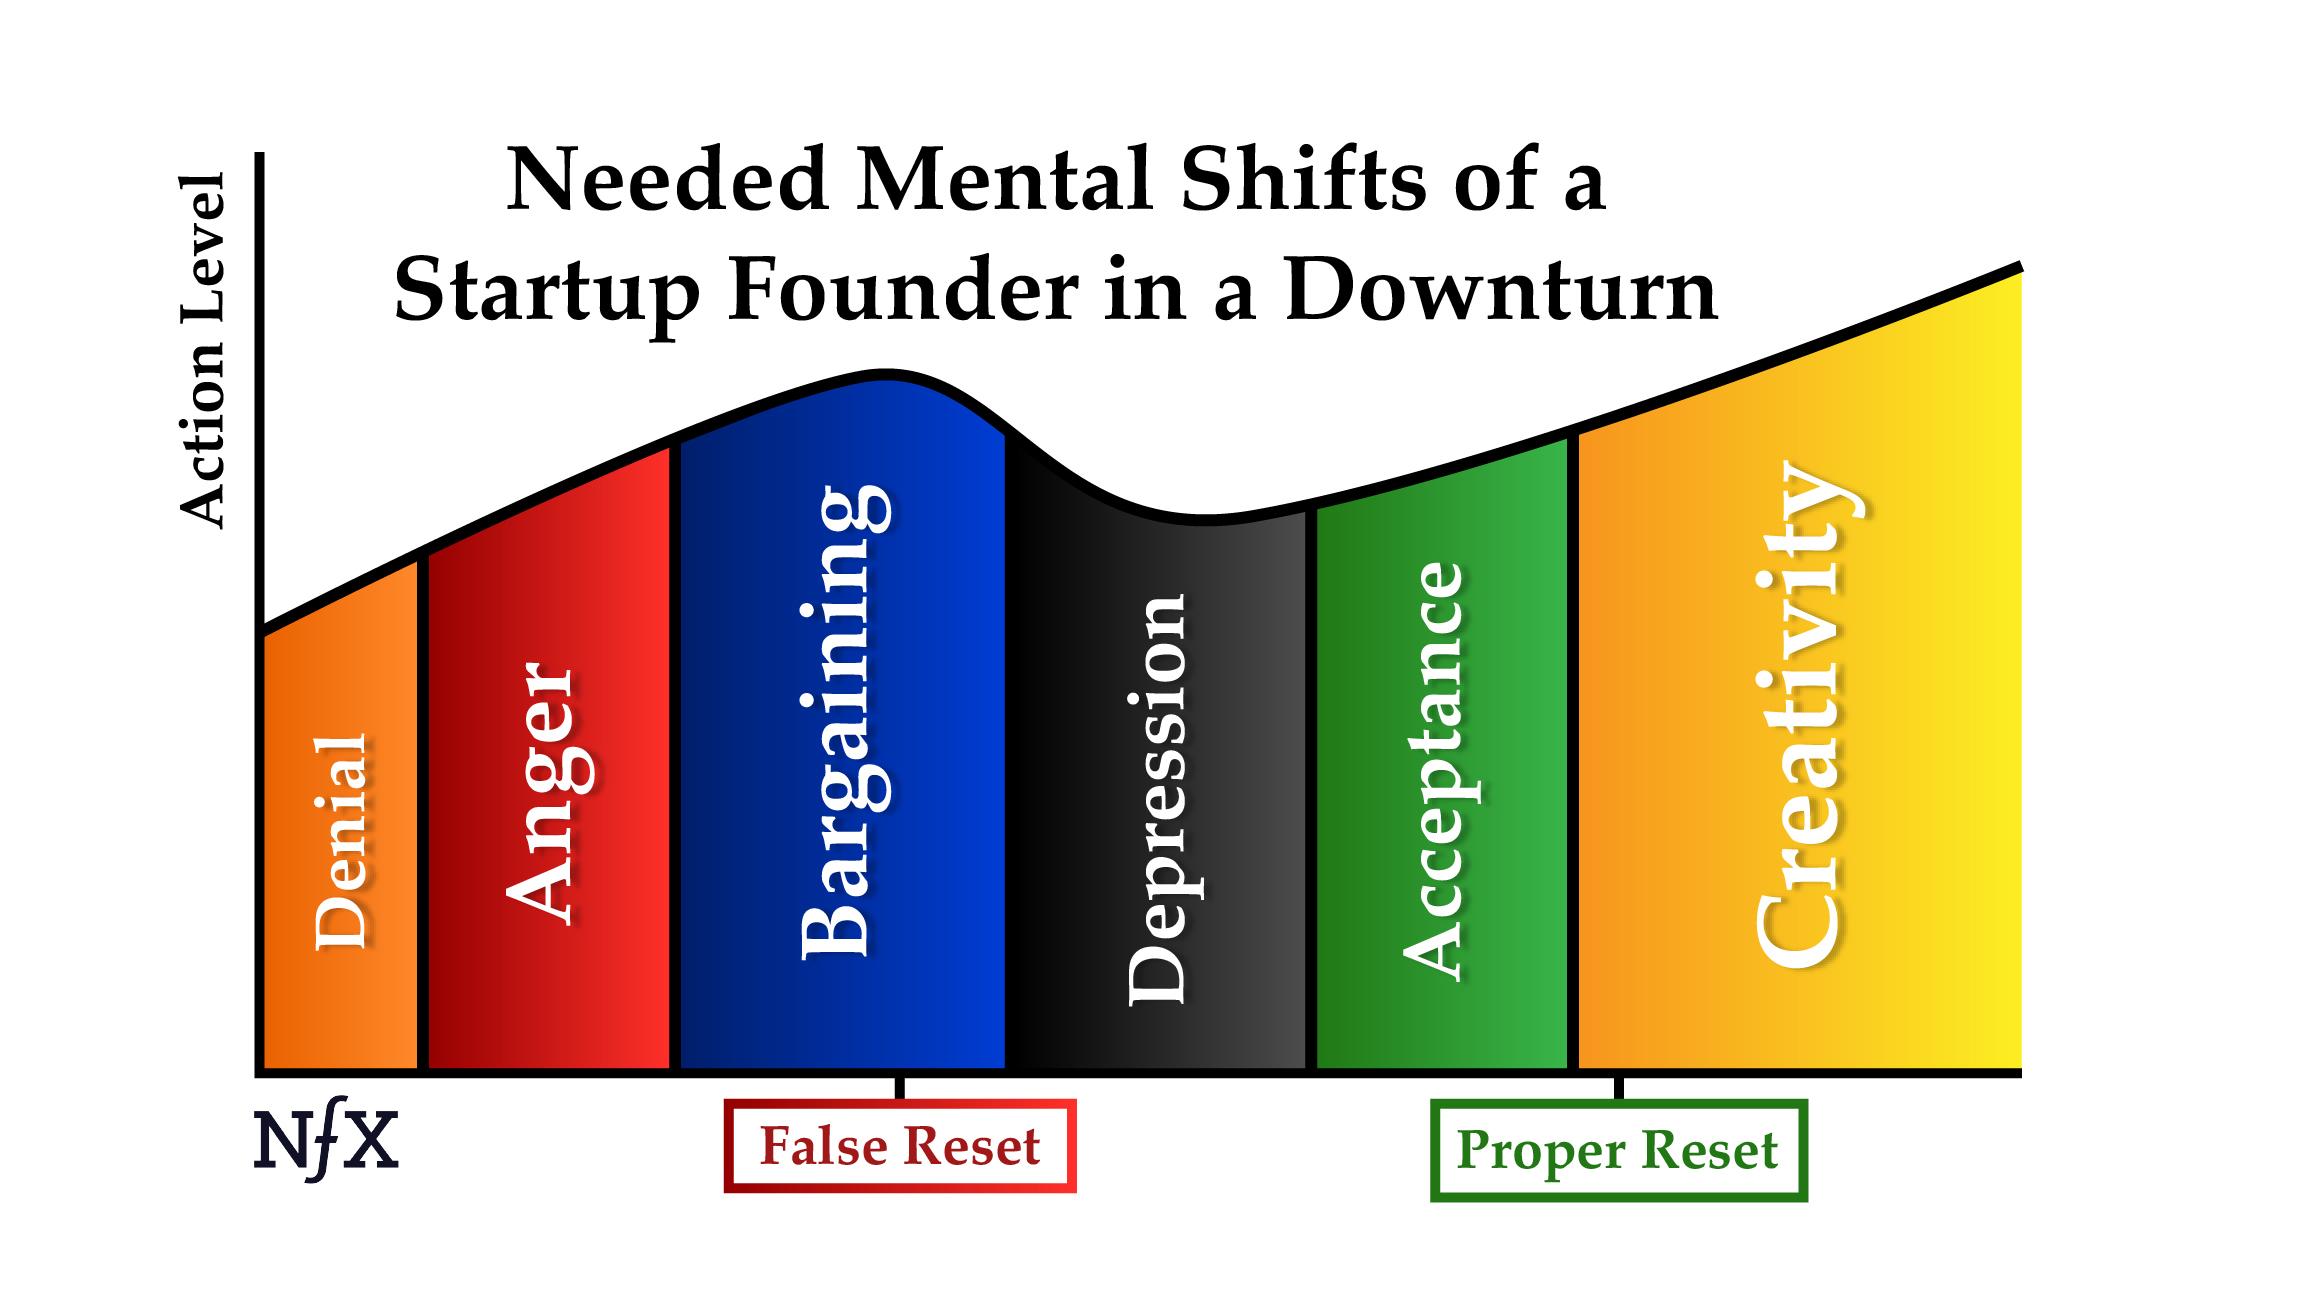 Needed Mental Shifts of a Startup Founder during a Downturn